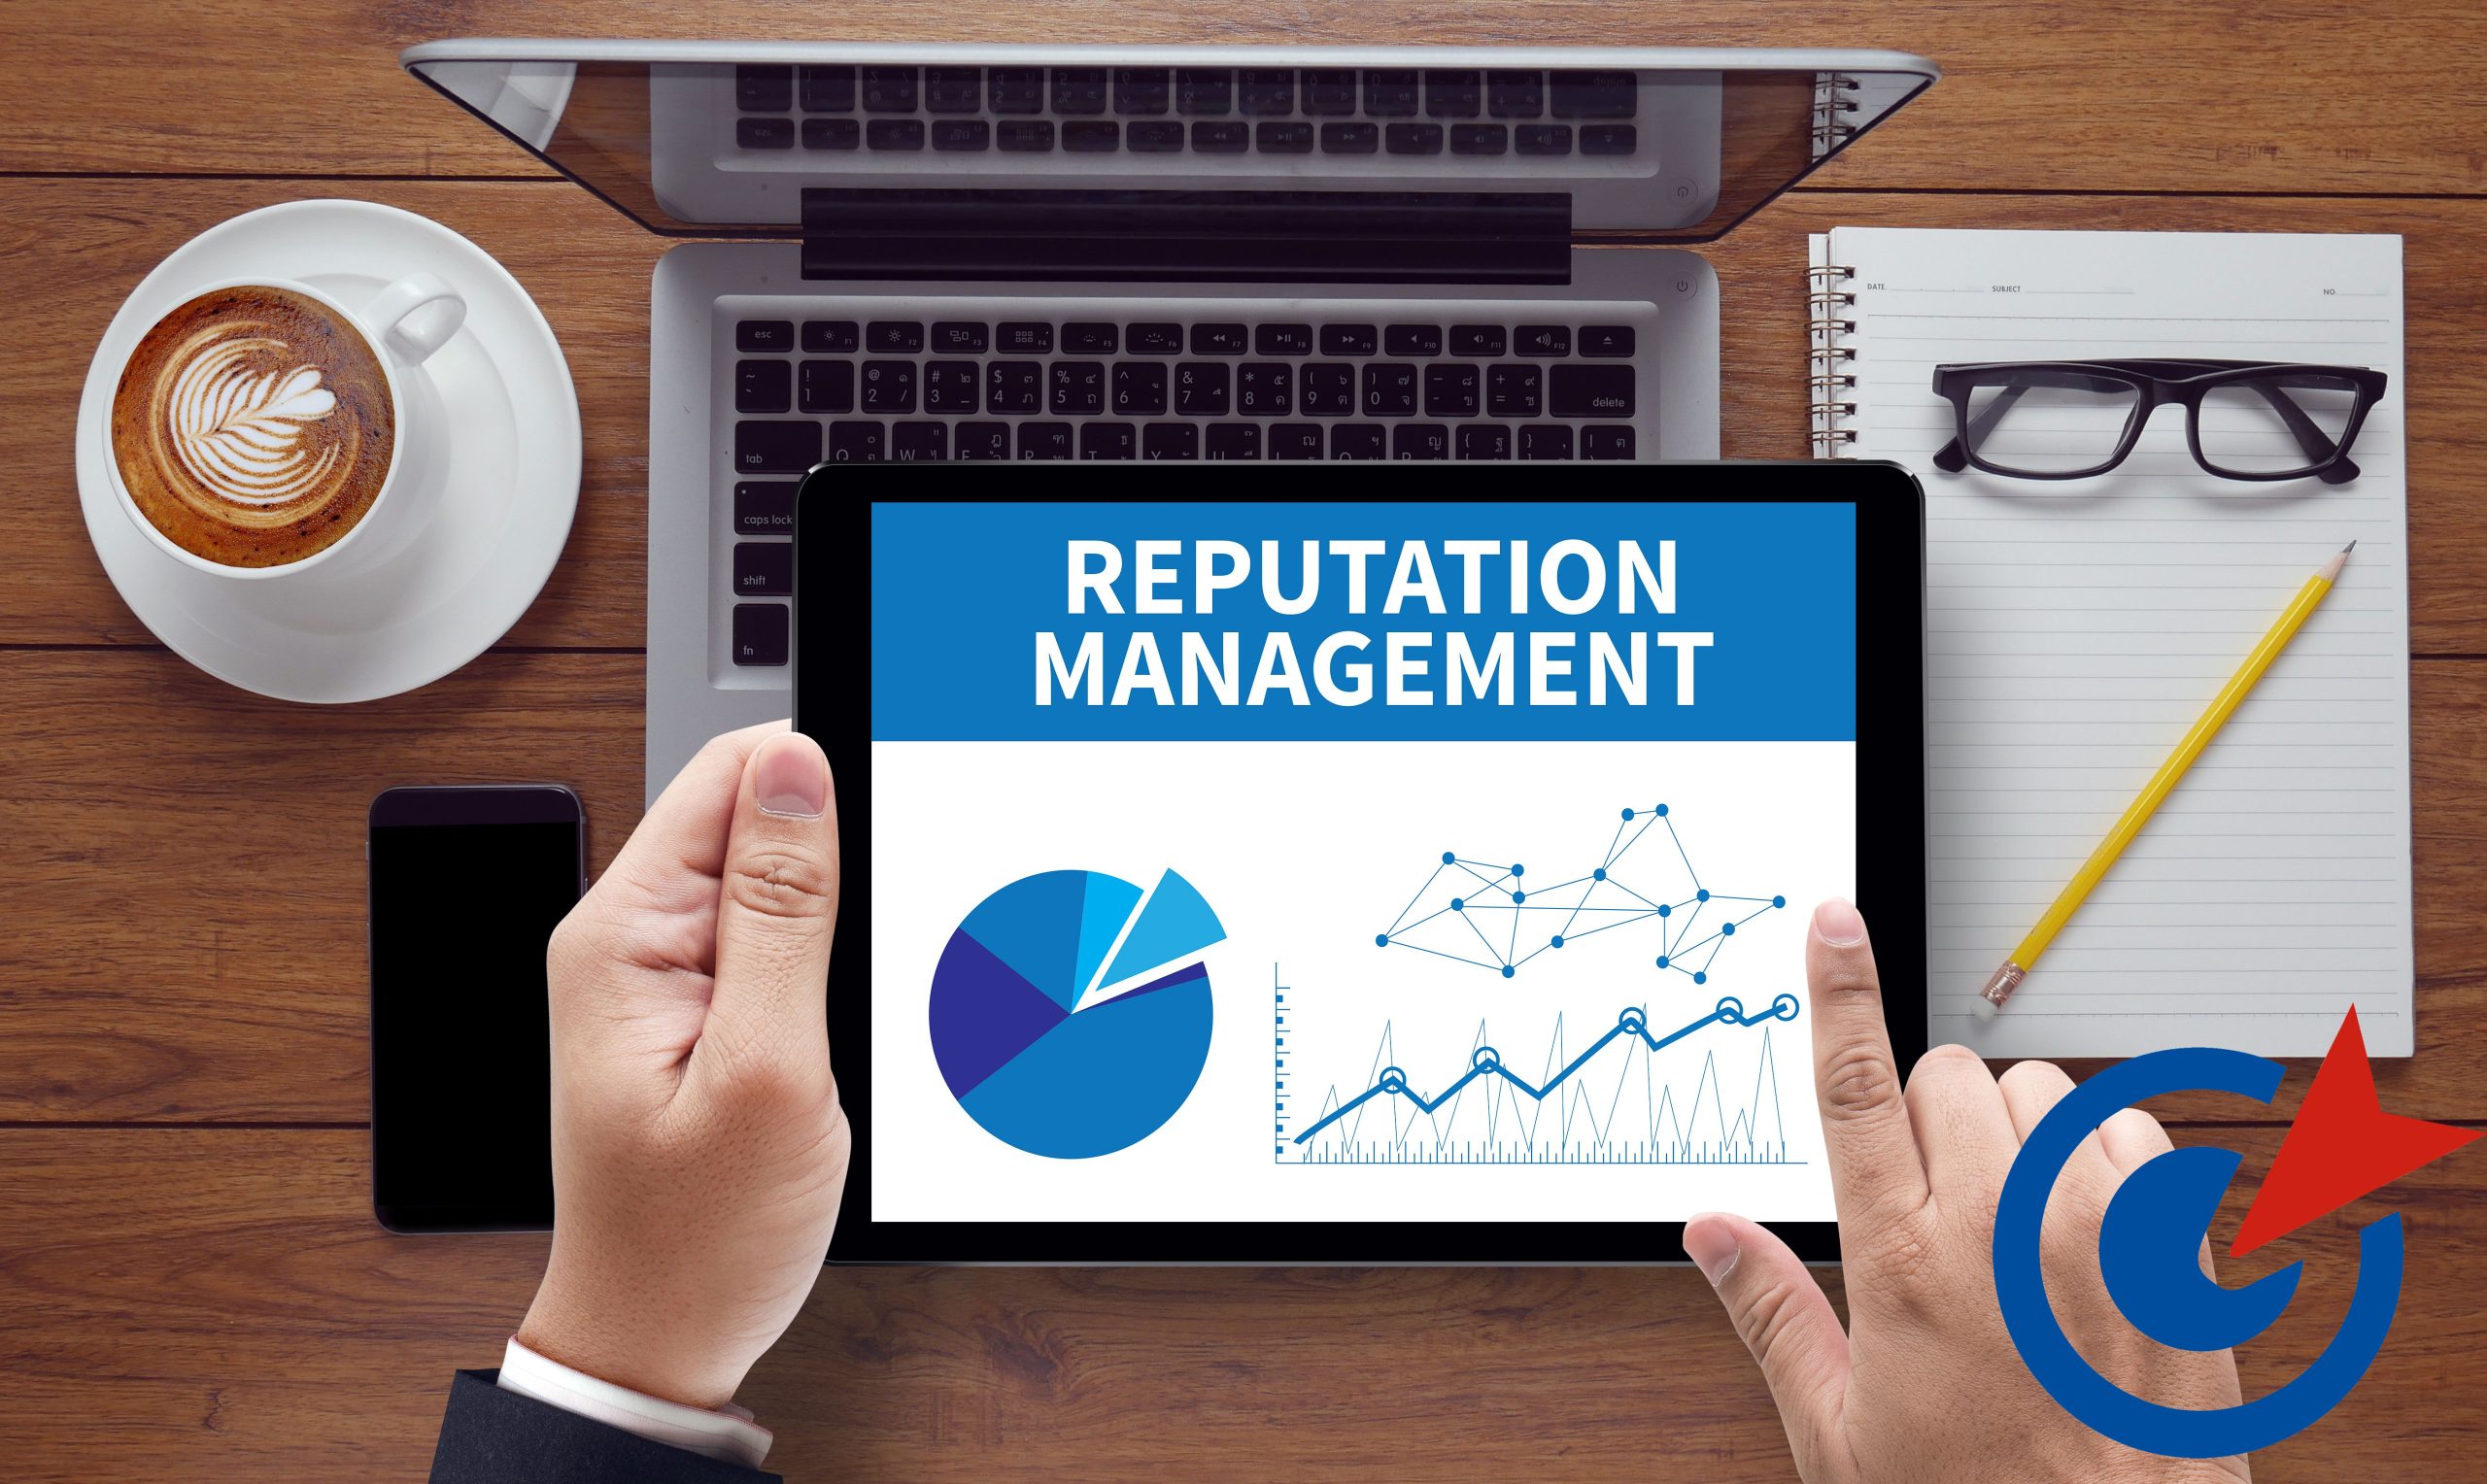 Top Reputation Management Tips For Small Businesses